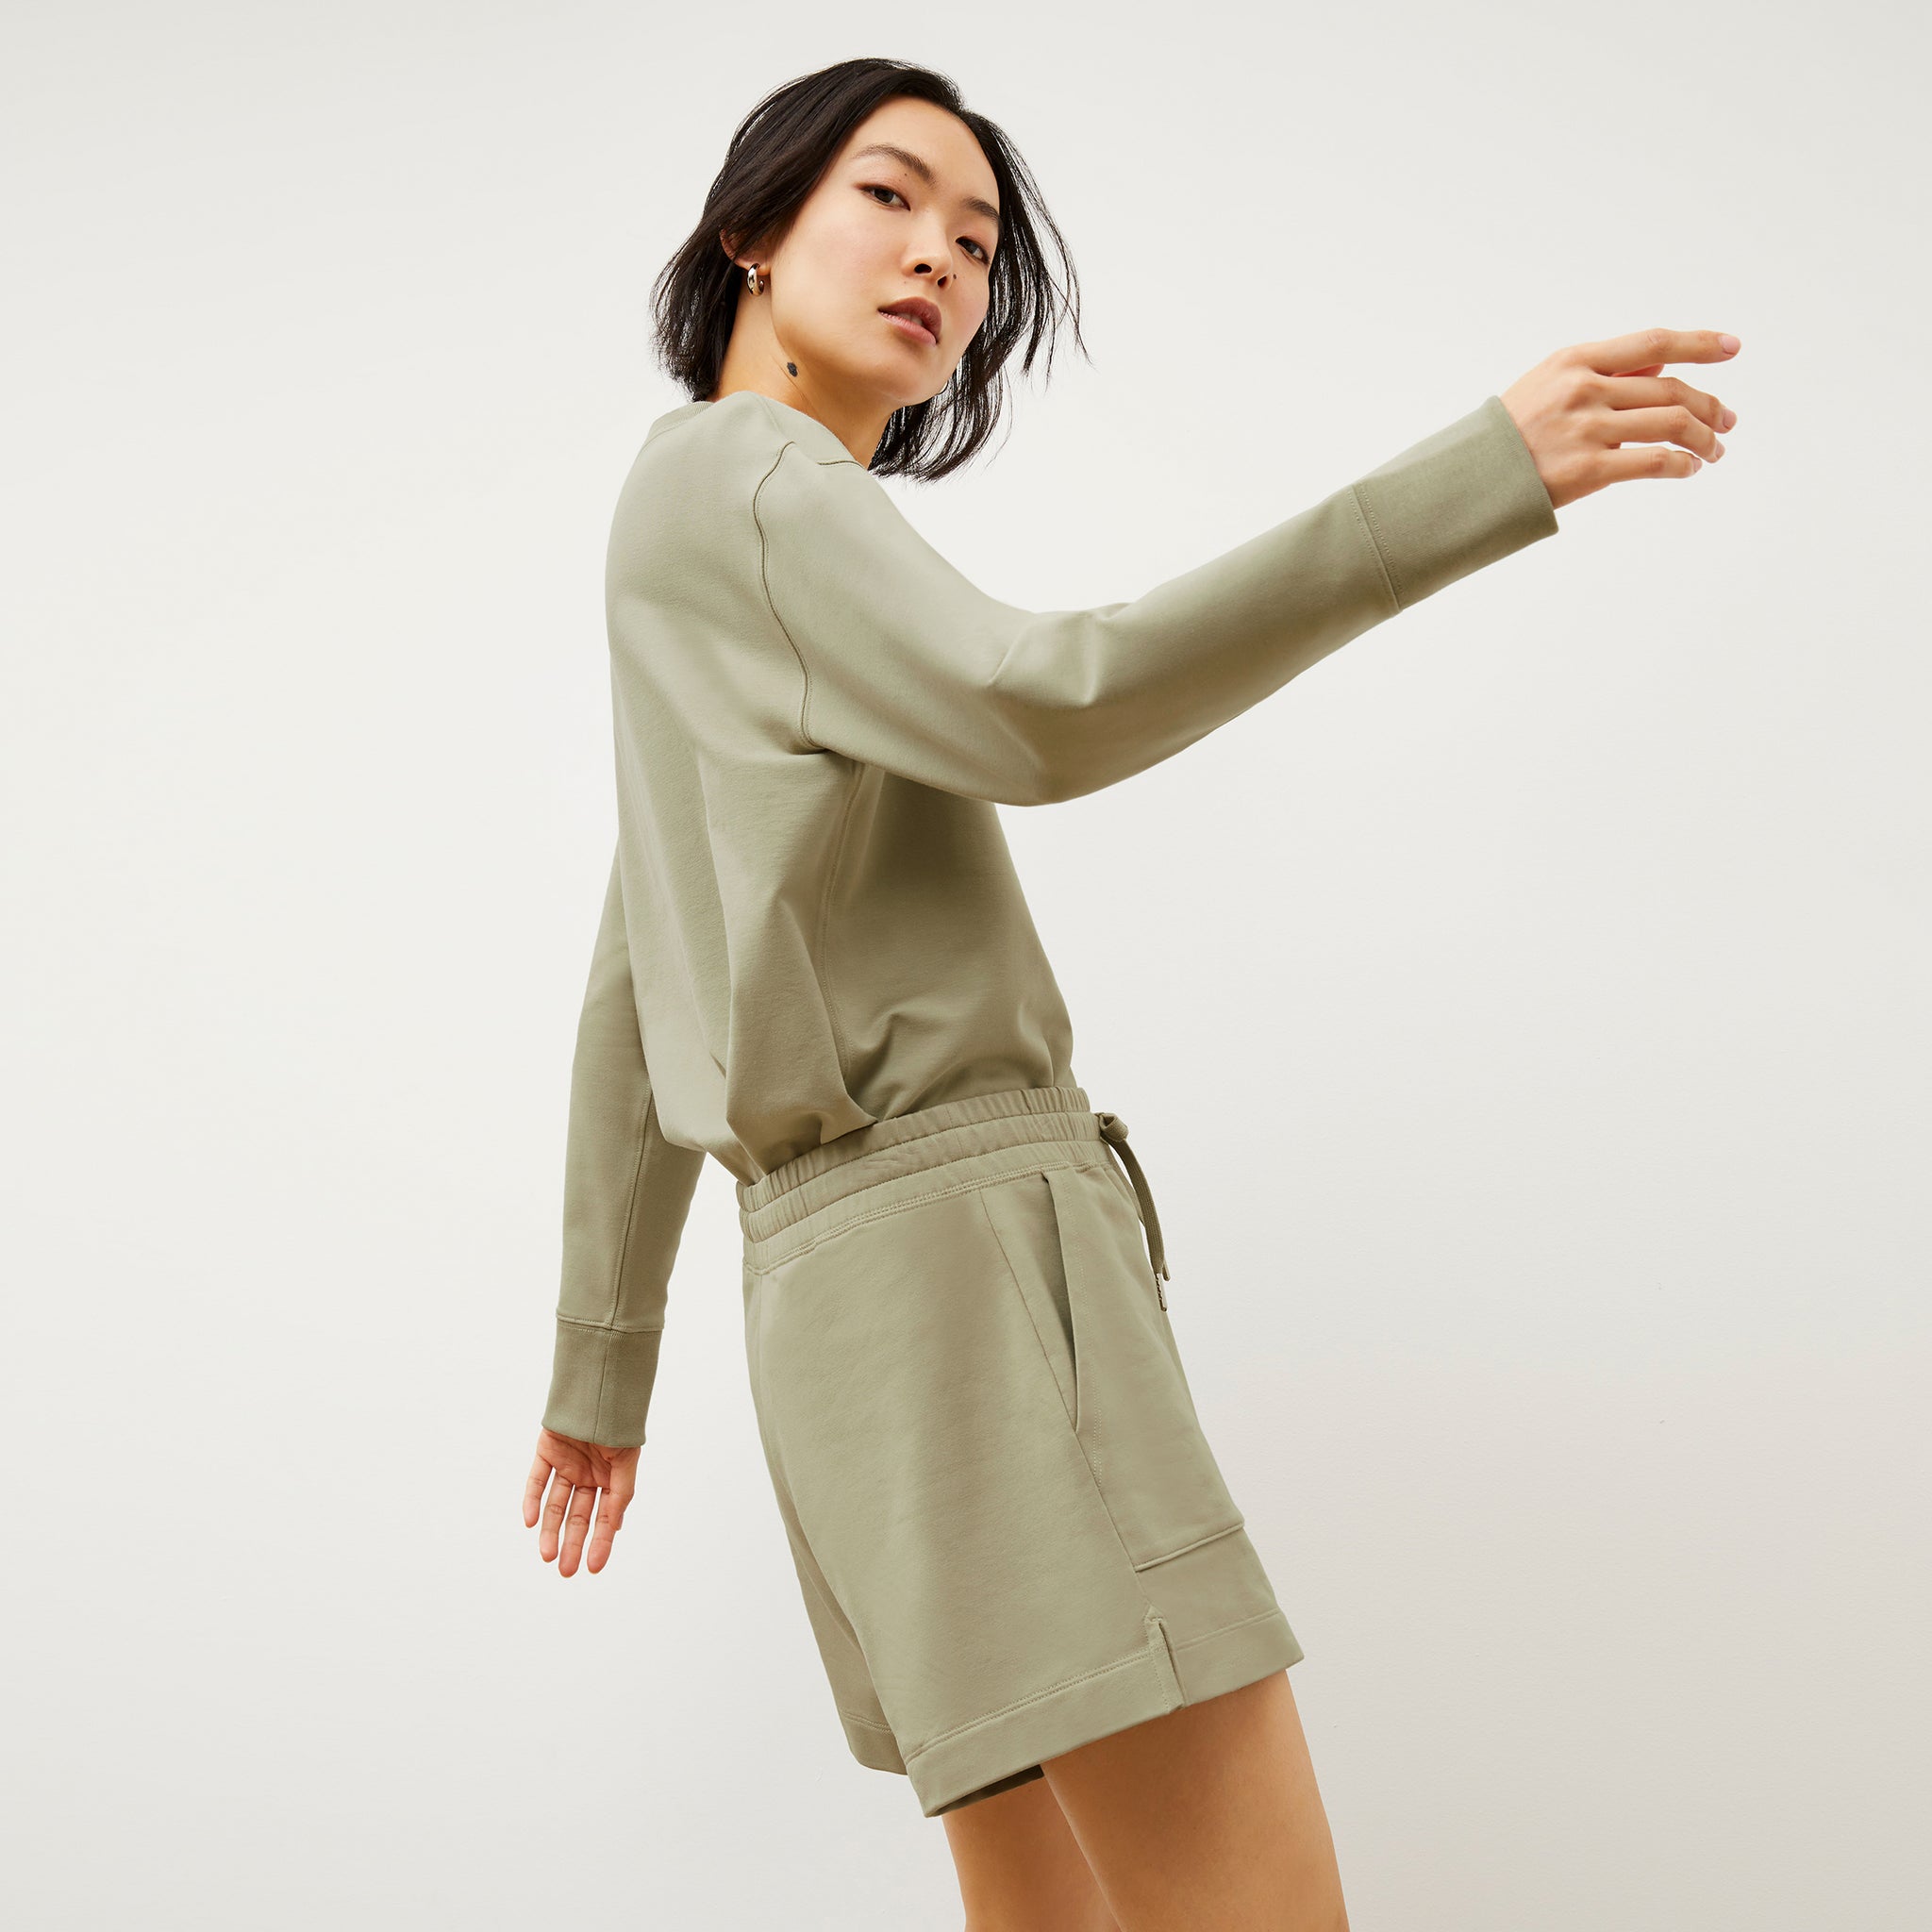 Side image of a woman wearing the Felix Short - Light French Terry in Laurel Green